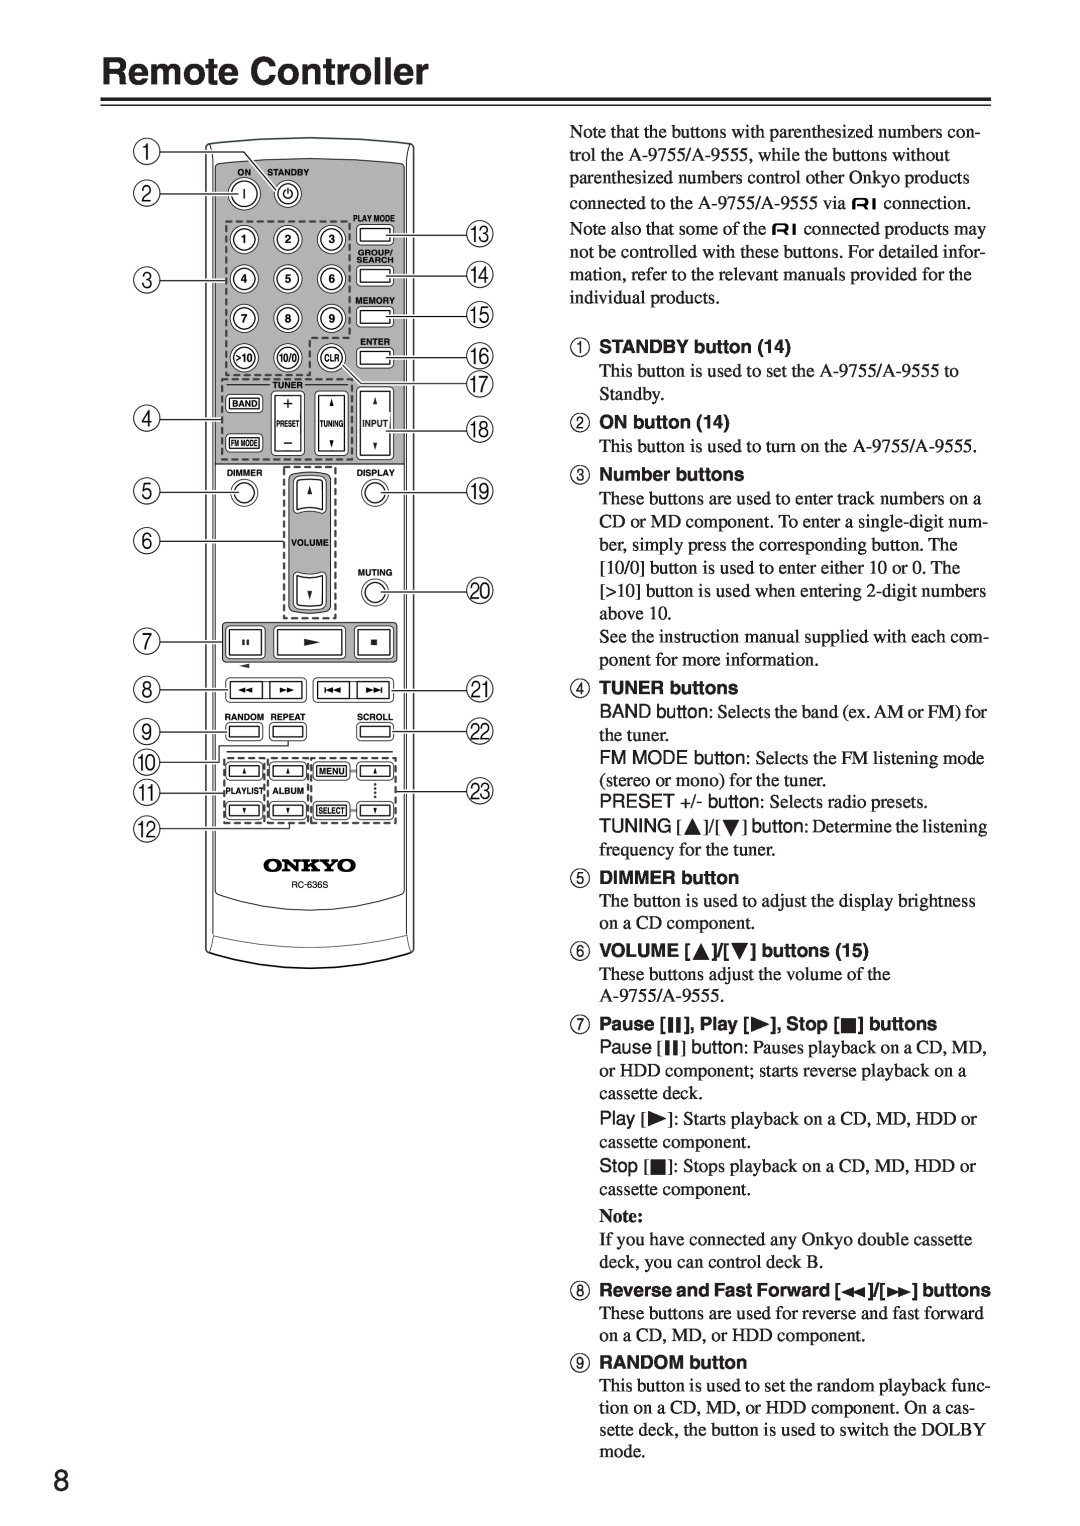 Onkyo 9555, A-9755 instruction manual Remote Controller 